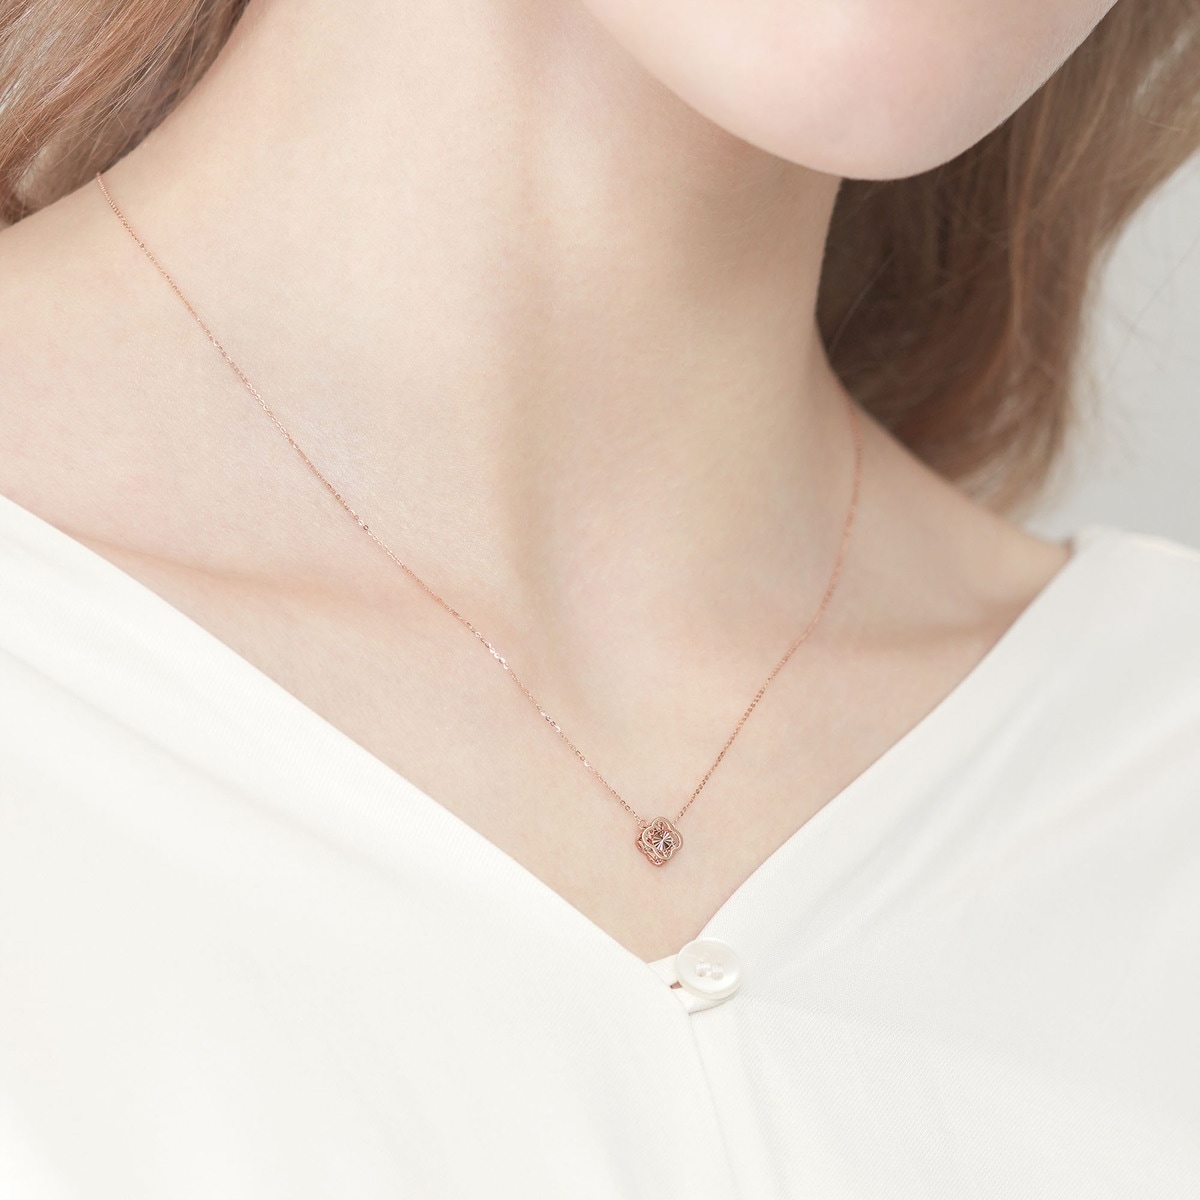 Minty Collection 18K Rose Gold Necklace - 91870N | Chow Sang Sang Jewellery